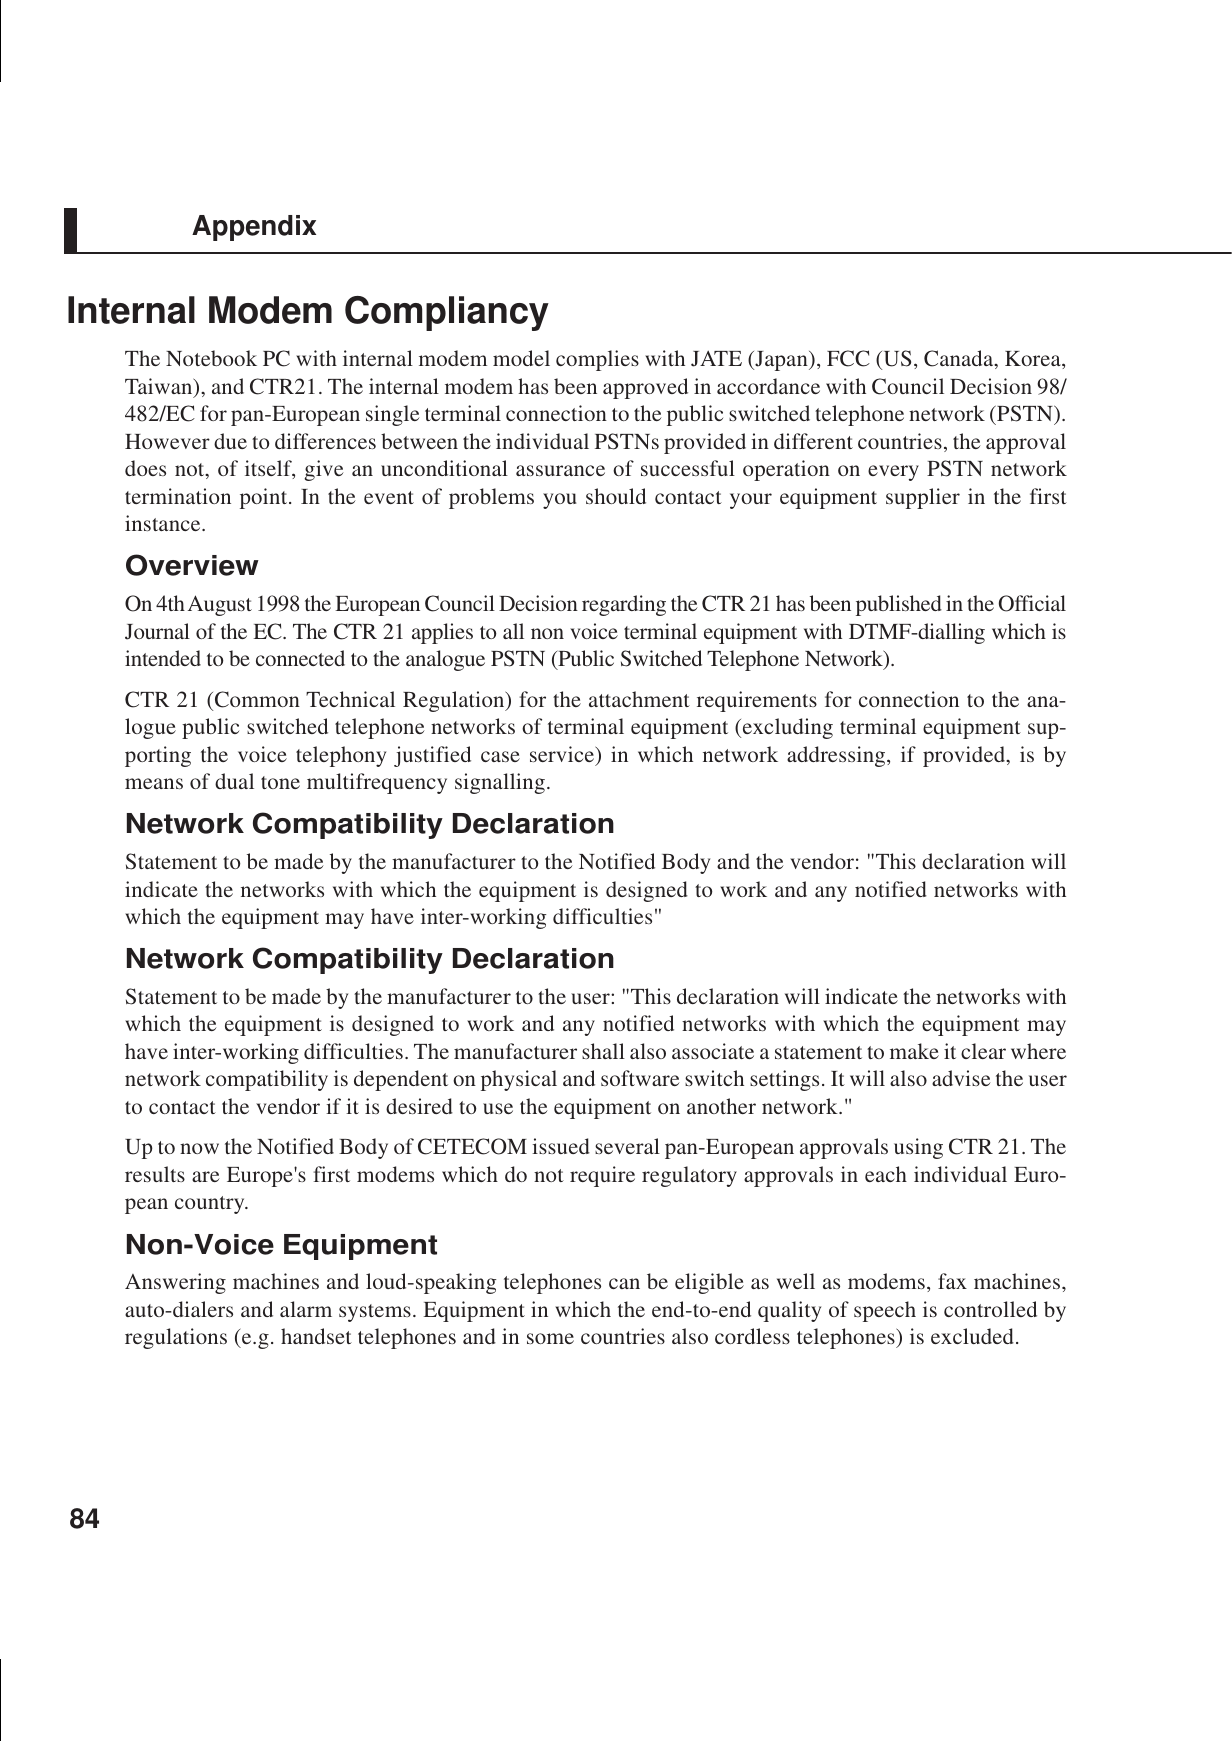 84AppendixInternal Modem CompliancyThe Notebook PC with internal modem model complies with JATE (Japan), FCC (US, Canada, Korea,Taiwan), and CTR21. The internal modem has been approved in accordance with Council Decision 98/482/EC for pan-European single terminal connection to the public switched telephone network (PSTN).However due to differences between the individual PSTNs provided in different countries, the approvaldoes not, of itself, give an unconditional assurance of successful operation on every PSTN networktermination point. In the event of problems you should contact your equipment supplier in the firstinstance.OverviewOn 4th August 1998 the European Council Decision regarding the CTR 21 has been published in the OfficialJournal of the EC. The CTR 21 applies to all non voice terminal equipment with DTMF-dialling which isintended to be connected to the analogue PSTN (Public Switched Telephone Network).CTR 21 (Common Technical Regulation) for the attachment requirements for connection to the ana-logue public switched telephone networks of terminal equipment (excluding terminal equipment sup-porting the voice telephony justified case service) in which network addressing, if provided, is bymeans of dual tone multifrequency signalling.Network Compatibility DeclarationStatement to be made by the manufacturer to the Notified Body and the vendor: &quot;This declaration willindicate the networks with which the equipment is designed to work and any notified networks withwhich the equipment may have inter-working difficulties&quot;Network Compatibility DeclarationStatement to be made by the manufacturer to the user: &quot;This declaration will indicate the networks withwhich the equipment is designed to work and any notified networks with which the equipment mayhave inter-working difficulties. The manufacturer shall also associate a statement to make it clear wherenetwork compatibility is dependent on physical and software switch settings. It will also advise the userto contact the vendor if it is desired to use the equipment on another network.&quot;Up to now the Notified Body of CETECOM issued several pan-European approvals using CTR 21. Theresults are Europe&apos;s first modems which do not require regulatory approvals in each individual Euro-pean country.Non-Voice EquipmentAnswering machines and loud-speaking telephones can be eligible as well as modems, fax machines,auto-dialers and alarm systems. Equipment in which the end-to-end quality of speech is controlled byregulations (e.g. handset telephones and in some countries also cordless telephones) is excluded.